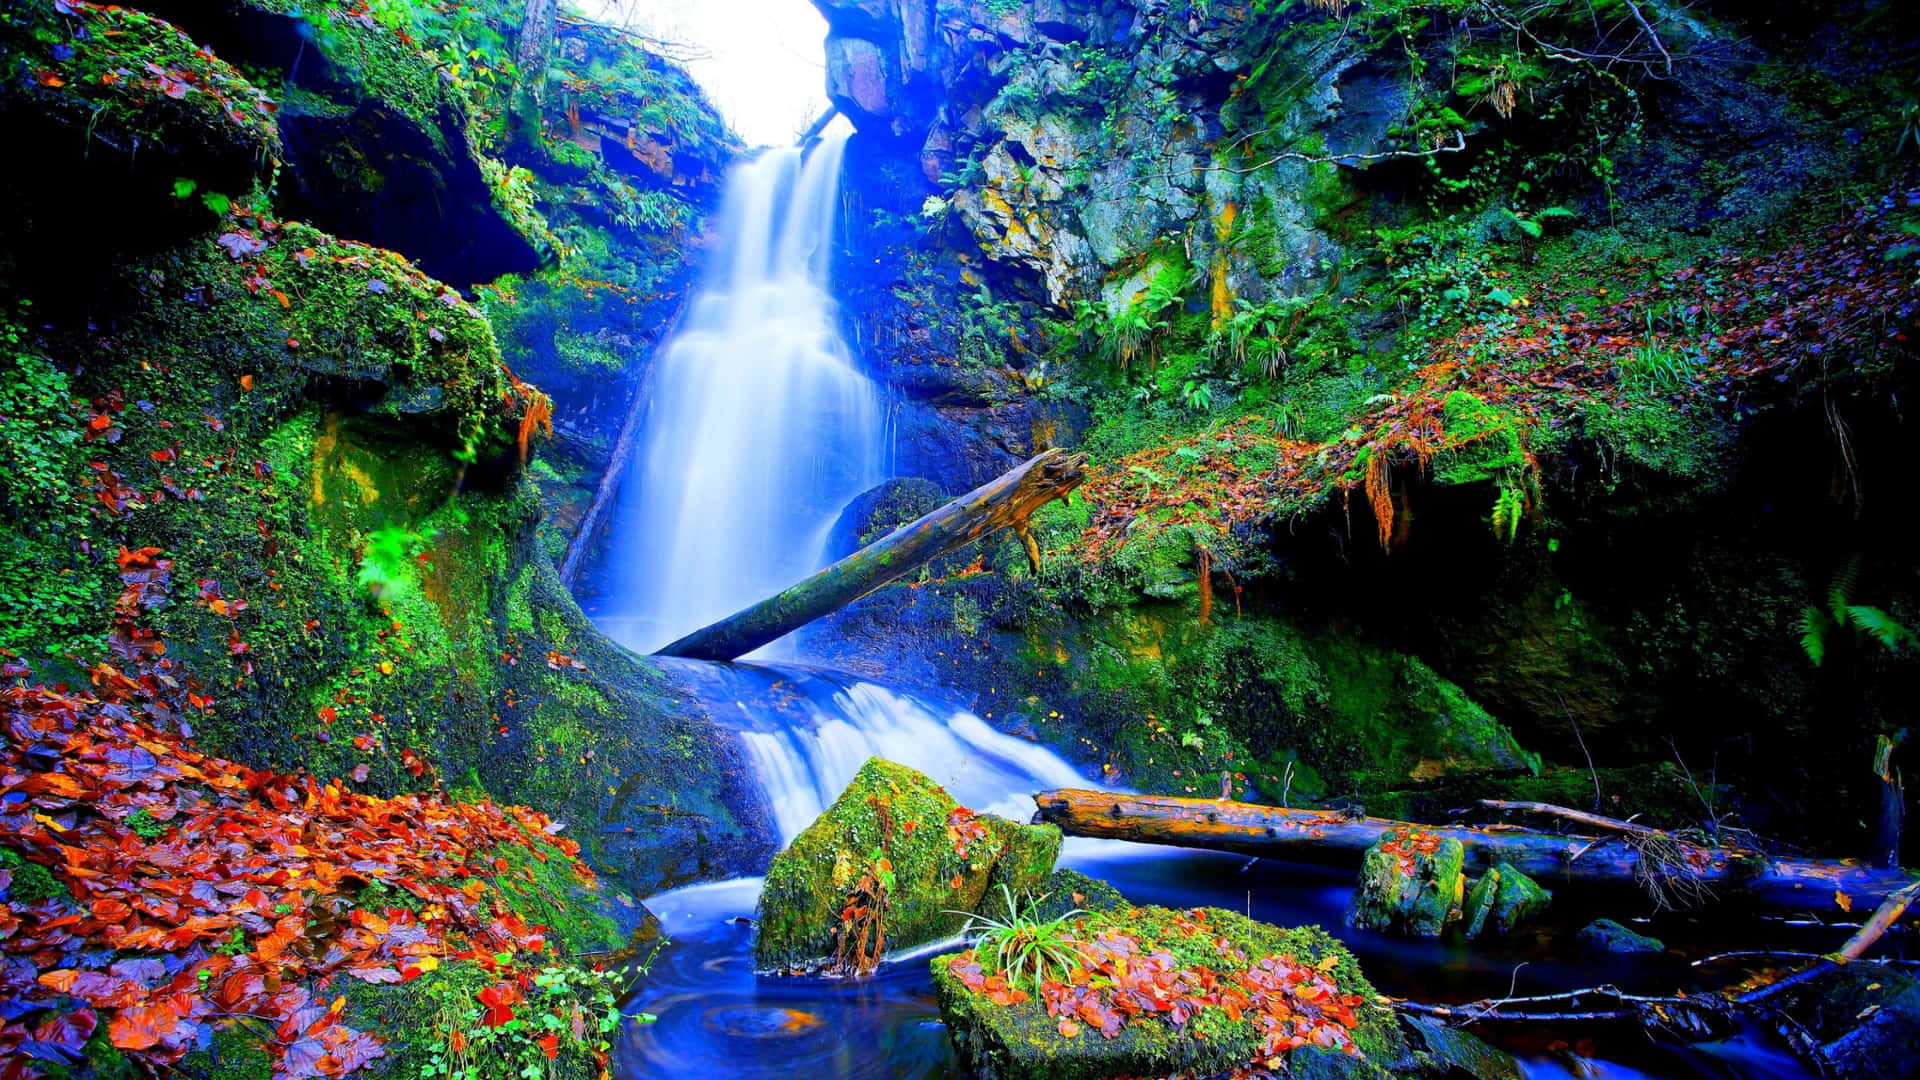 "Recharge with the majestic beauty of a waterfall!"